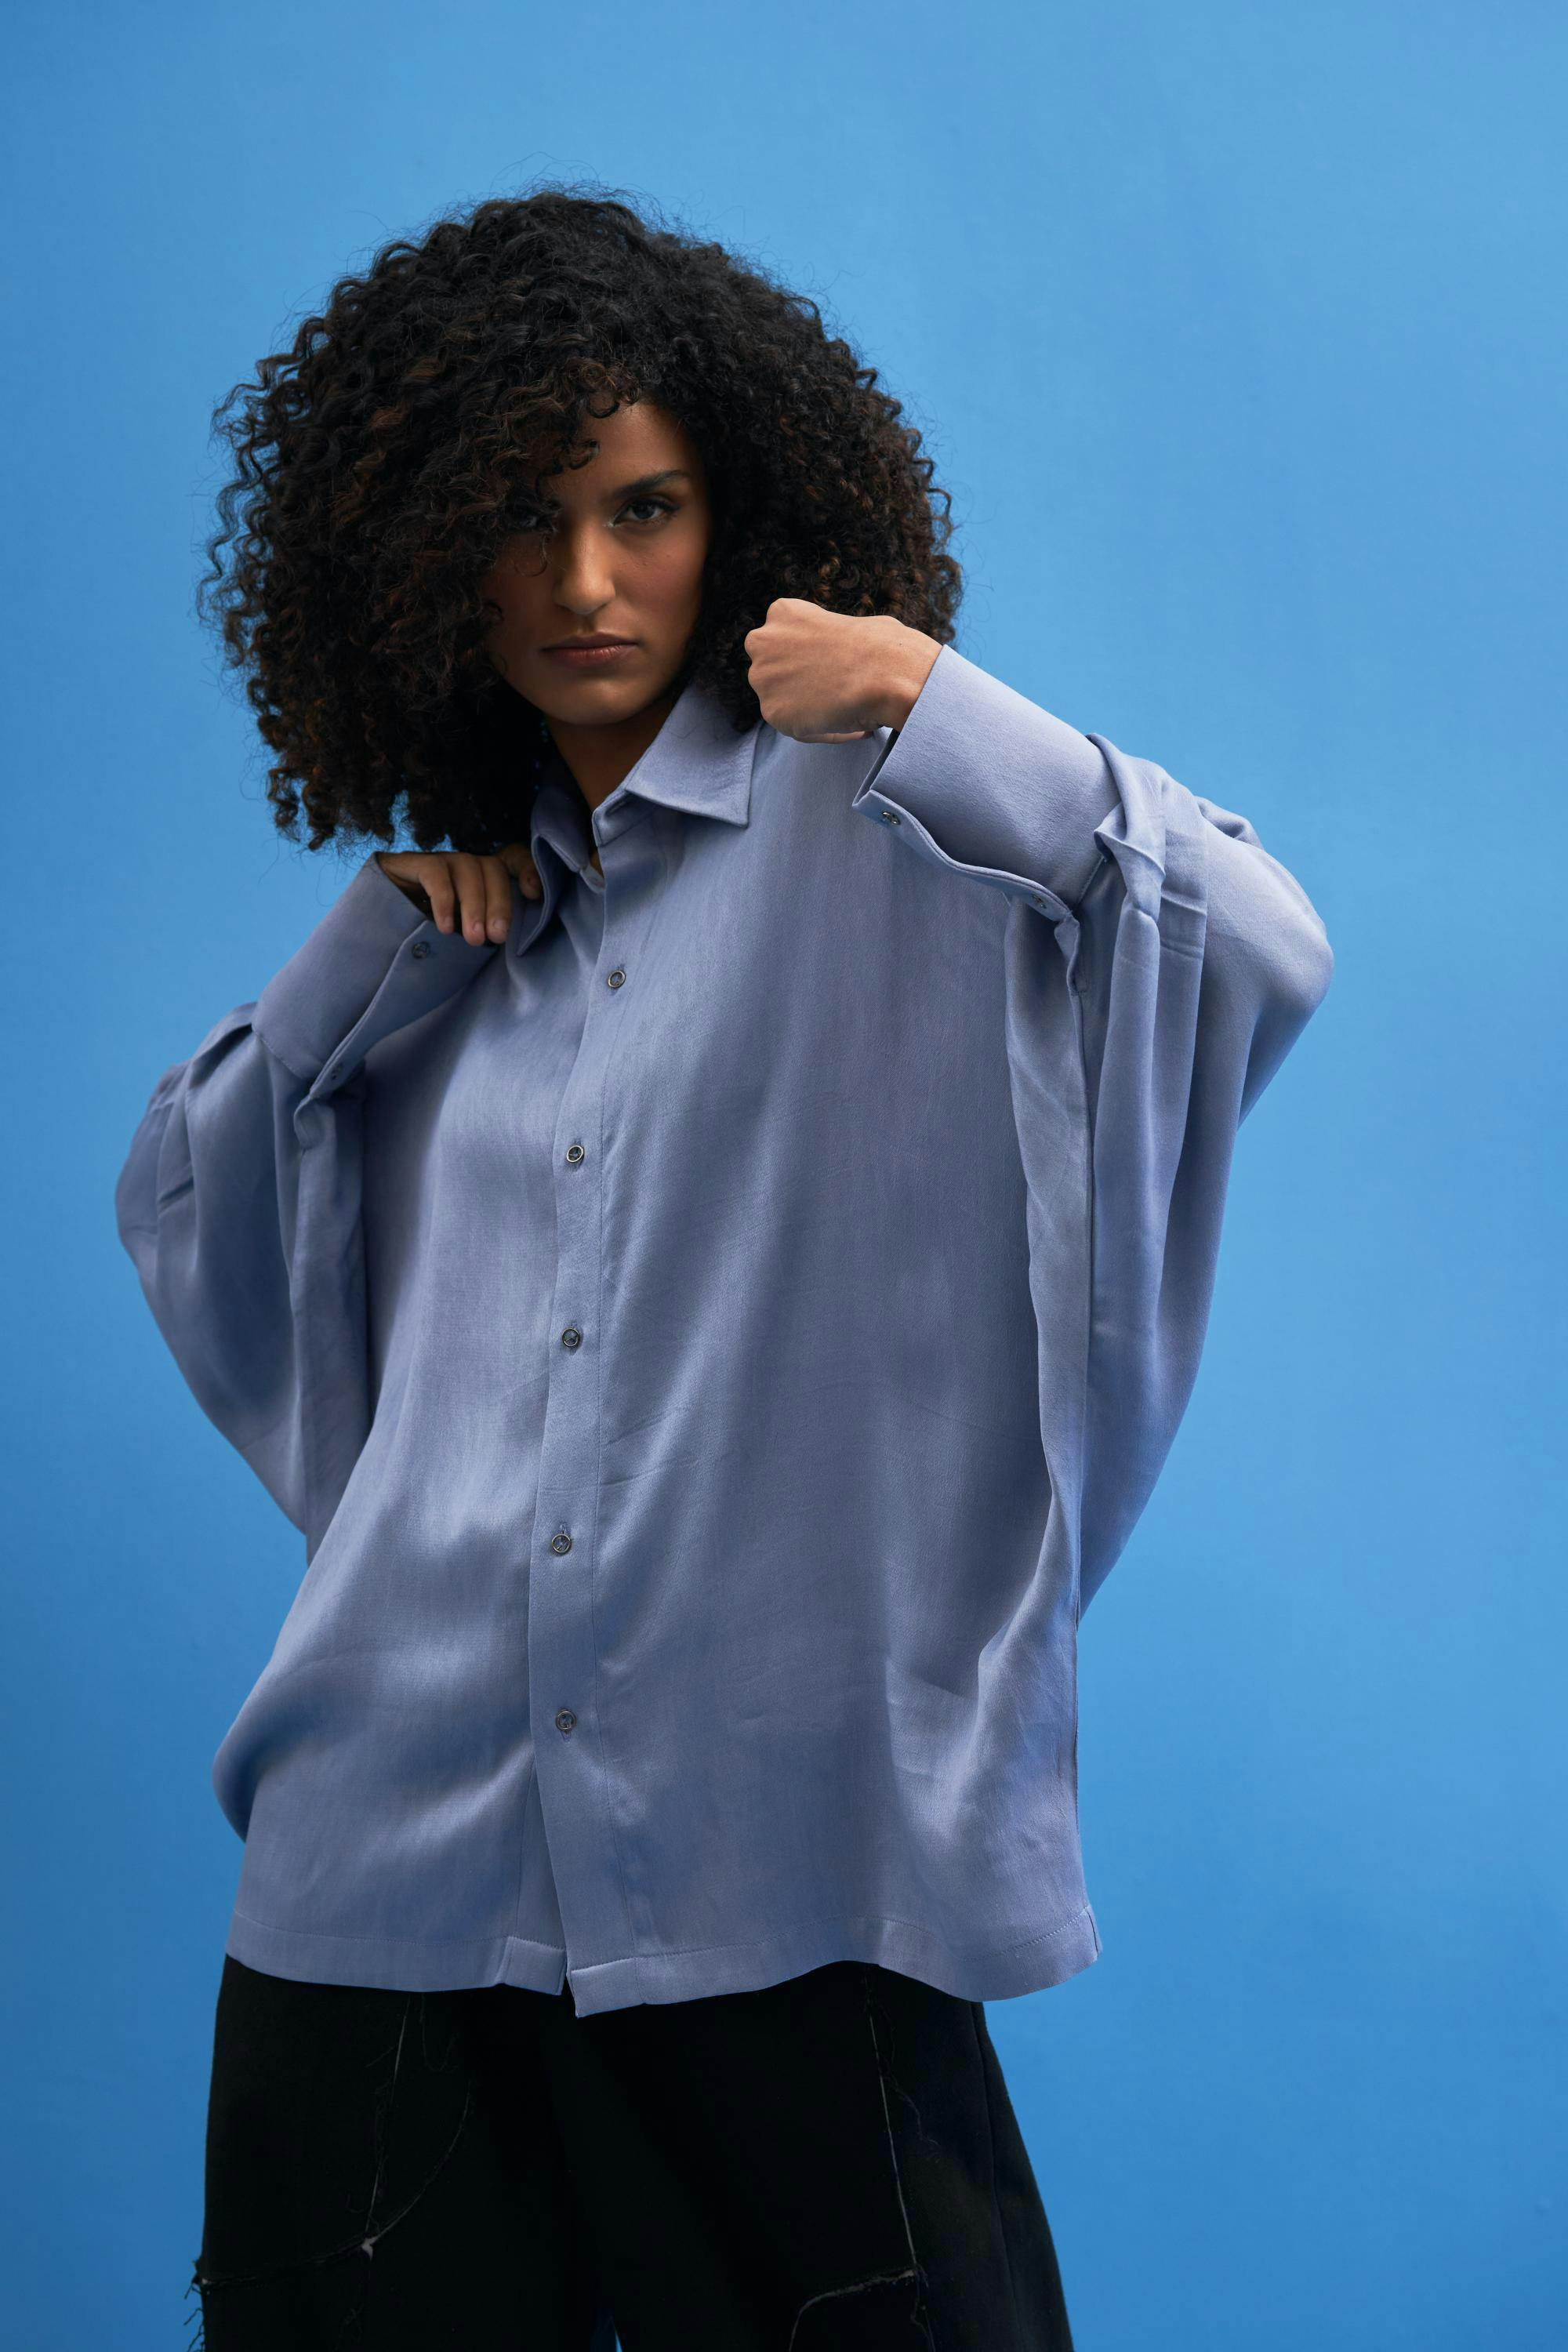 Steel Blue Batwing Shirt, a product by Siddhant Agrawal Label